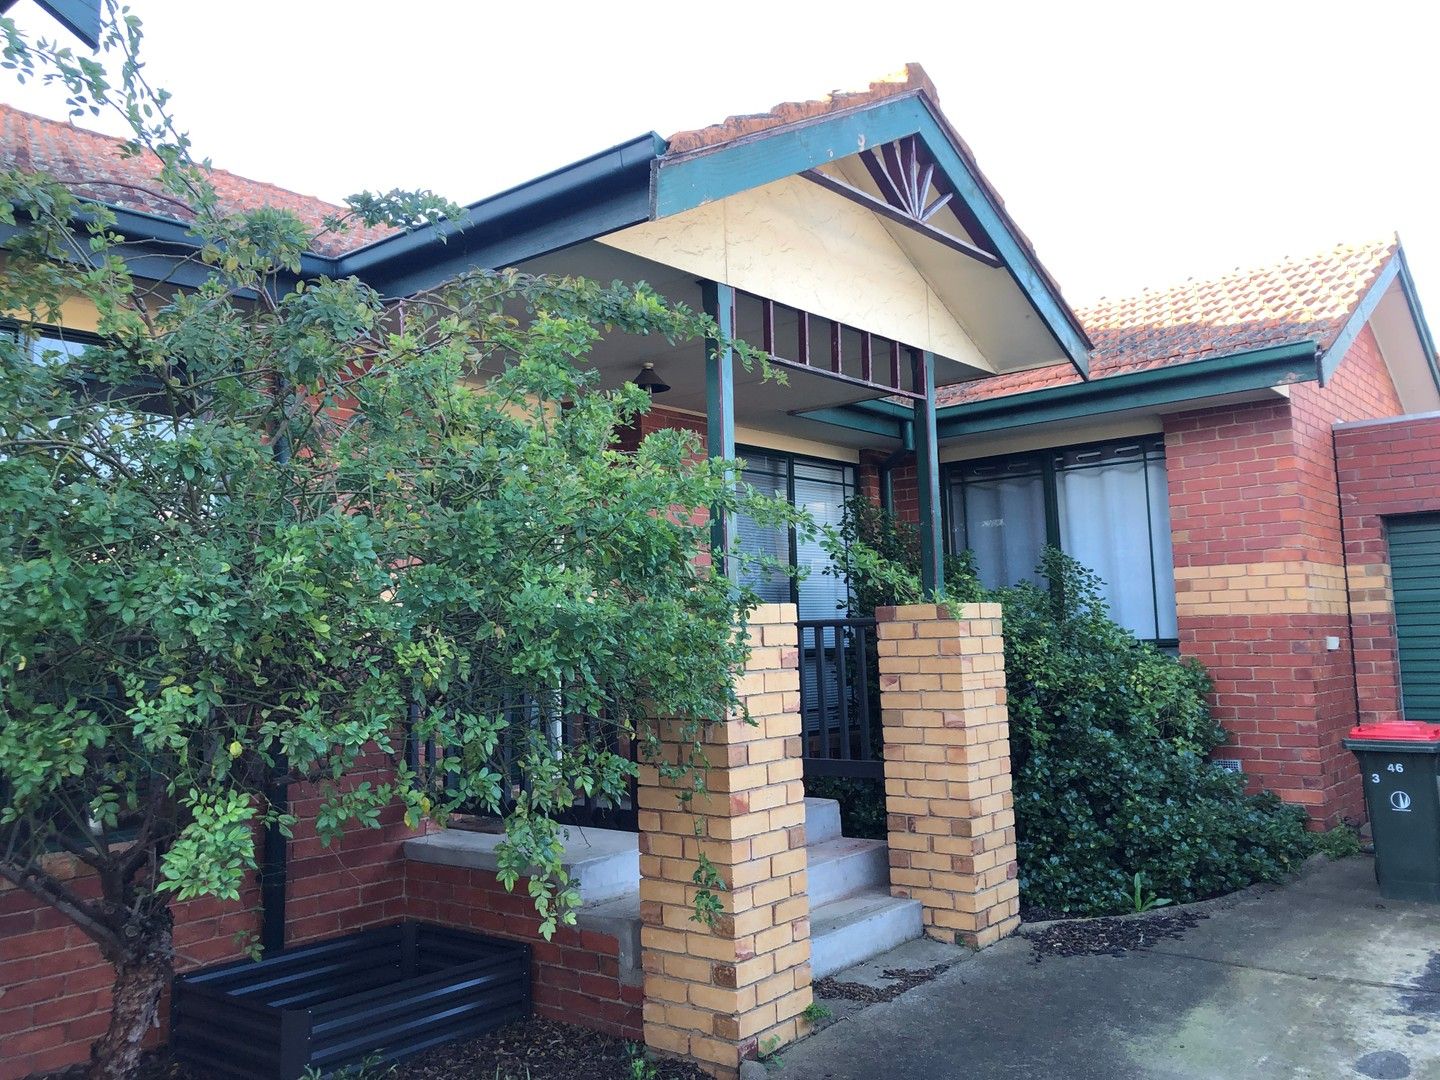 2 bedrooms Apartment / Unit / Flat in 3/46 Park Street PASCOE VALE VIC, 3044